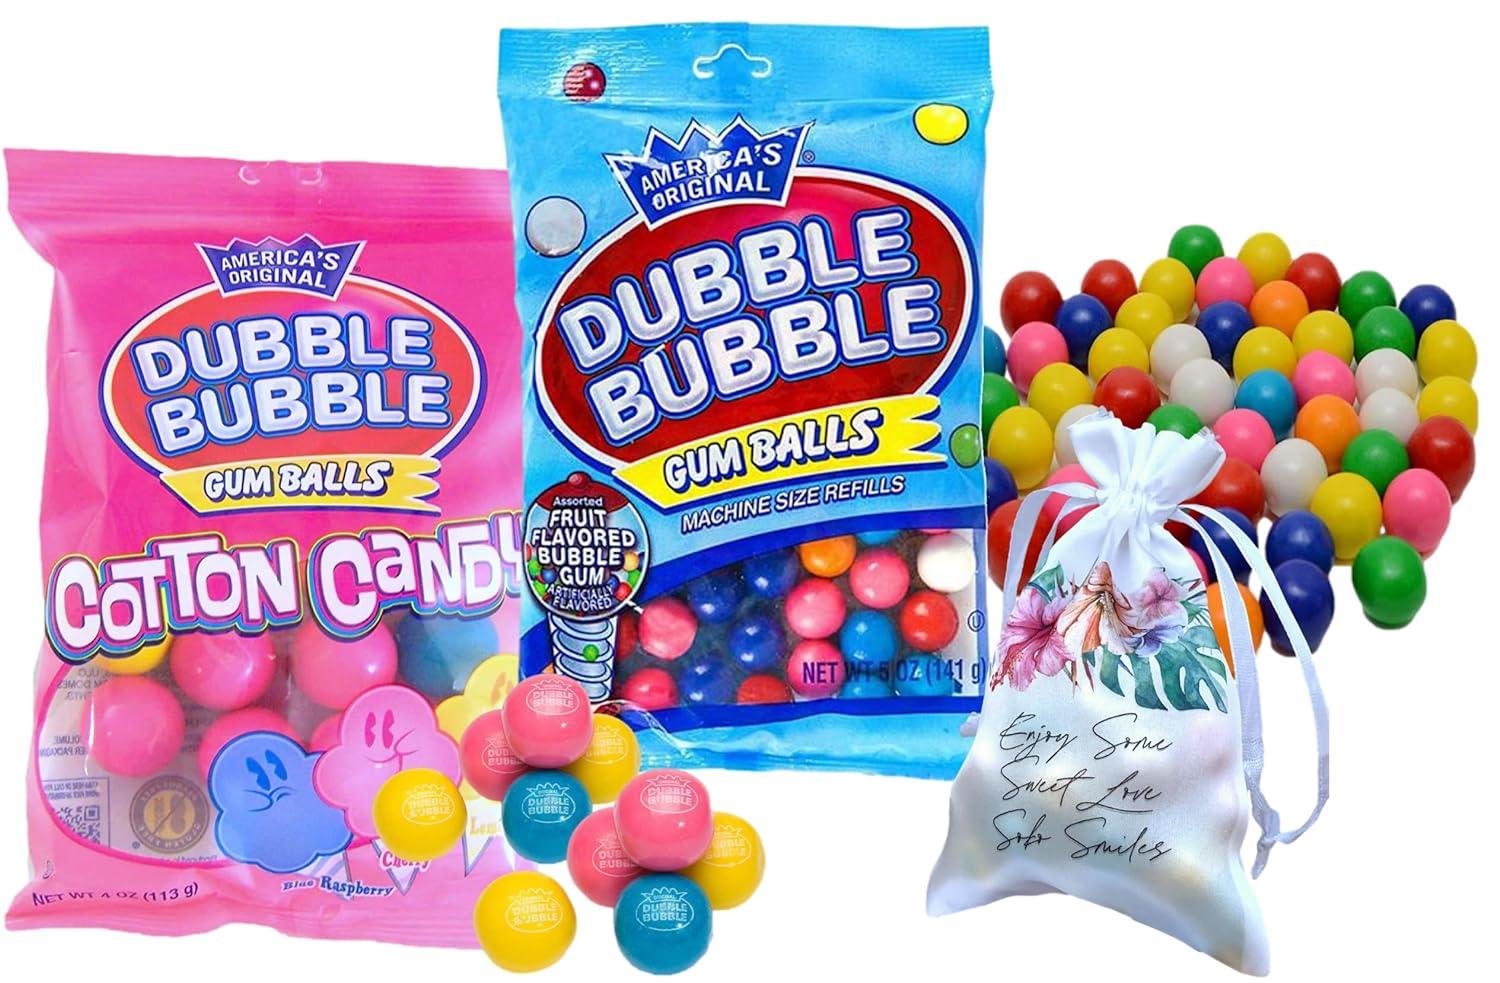 Dubble Bubble Cotton Candy and Fruit Flavored Gum Balls 2 Bags Bundle | Great for Gum ball Machine, Themed Party, Birthday, Halloween, Christmas Holiday Gift | Soko Smiles Pocket Bag Included